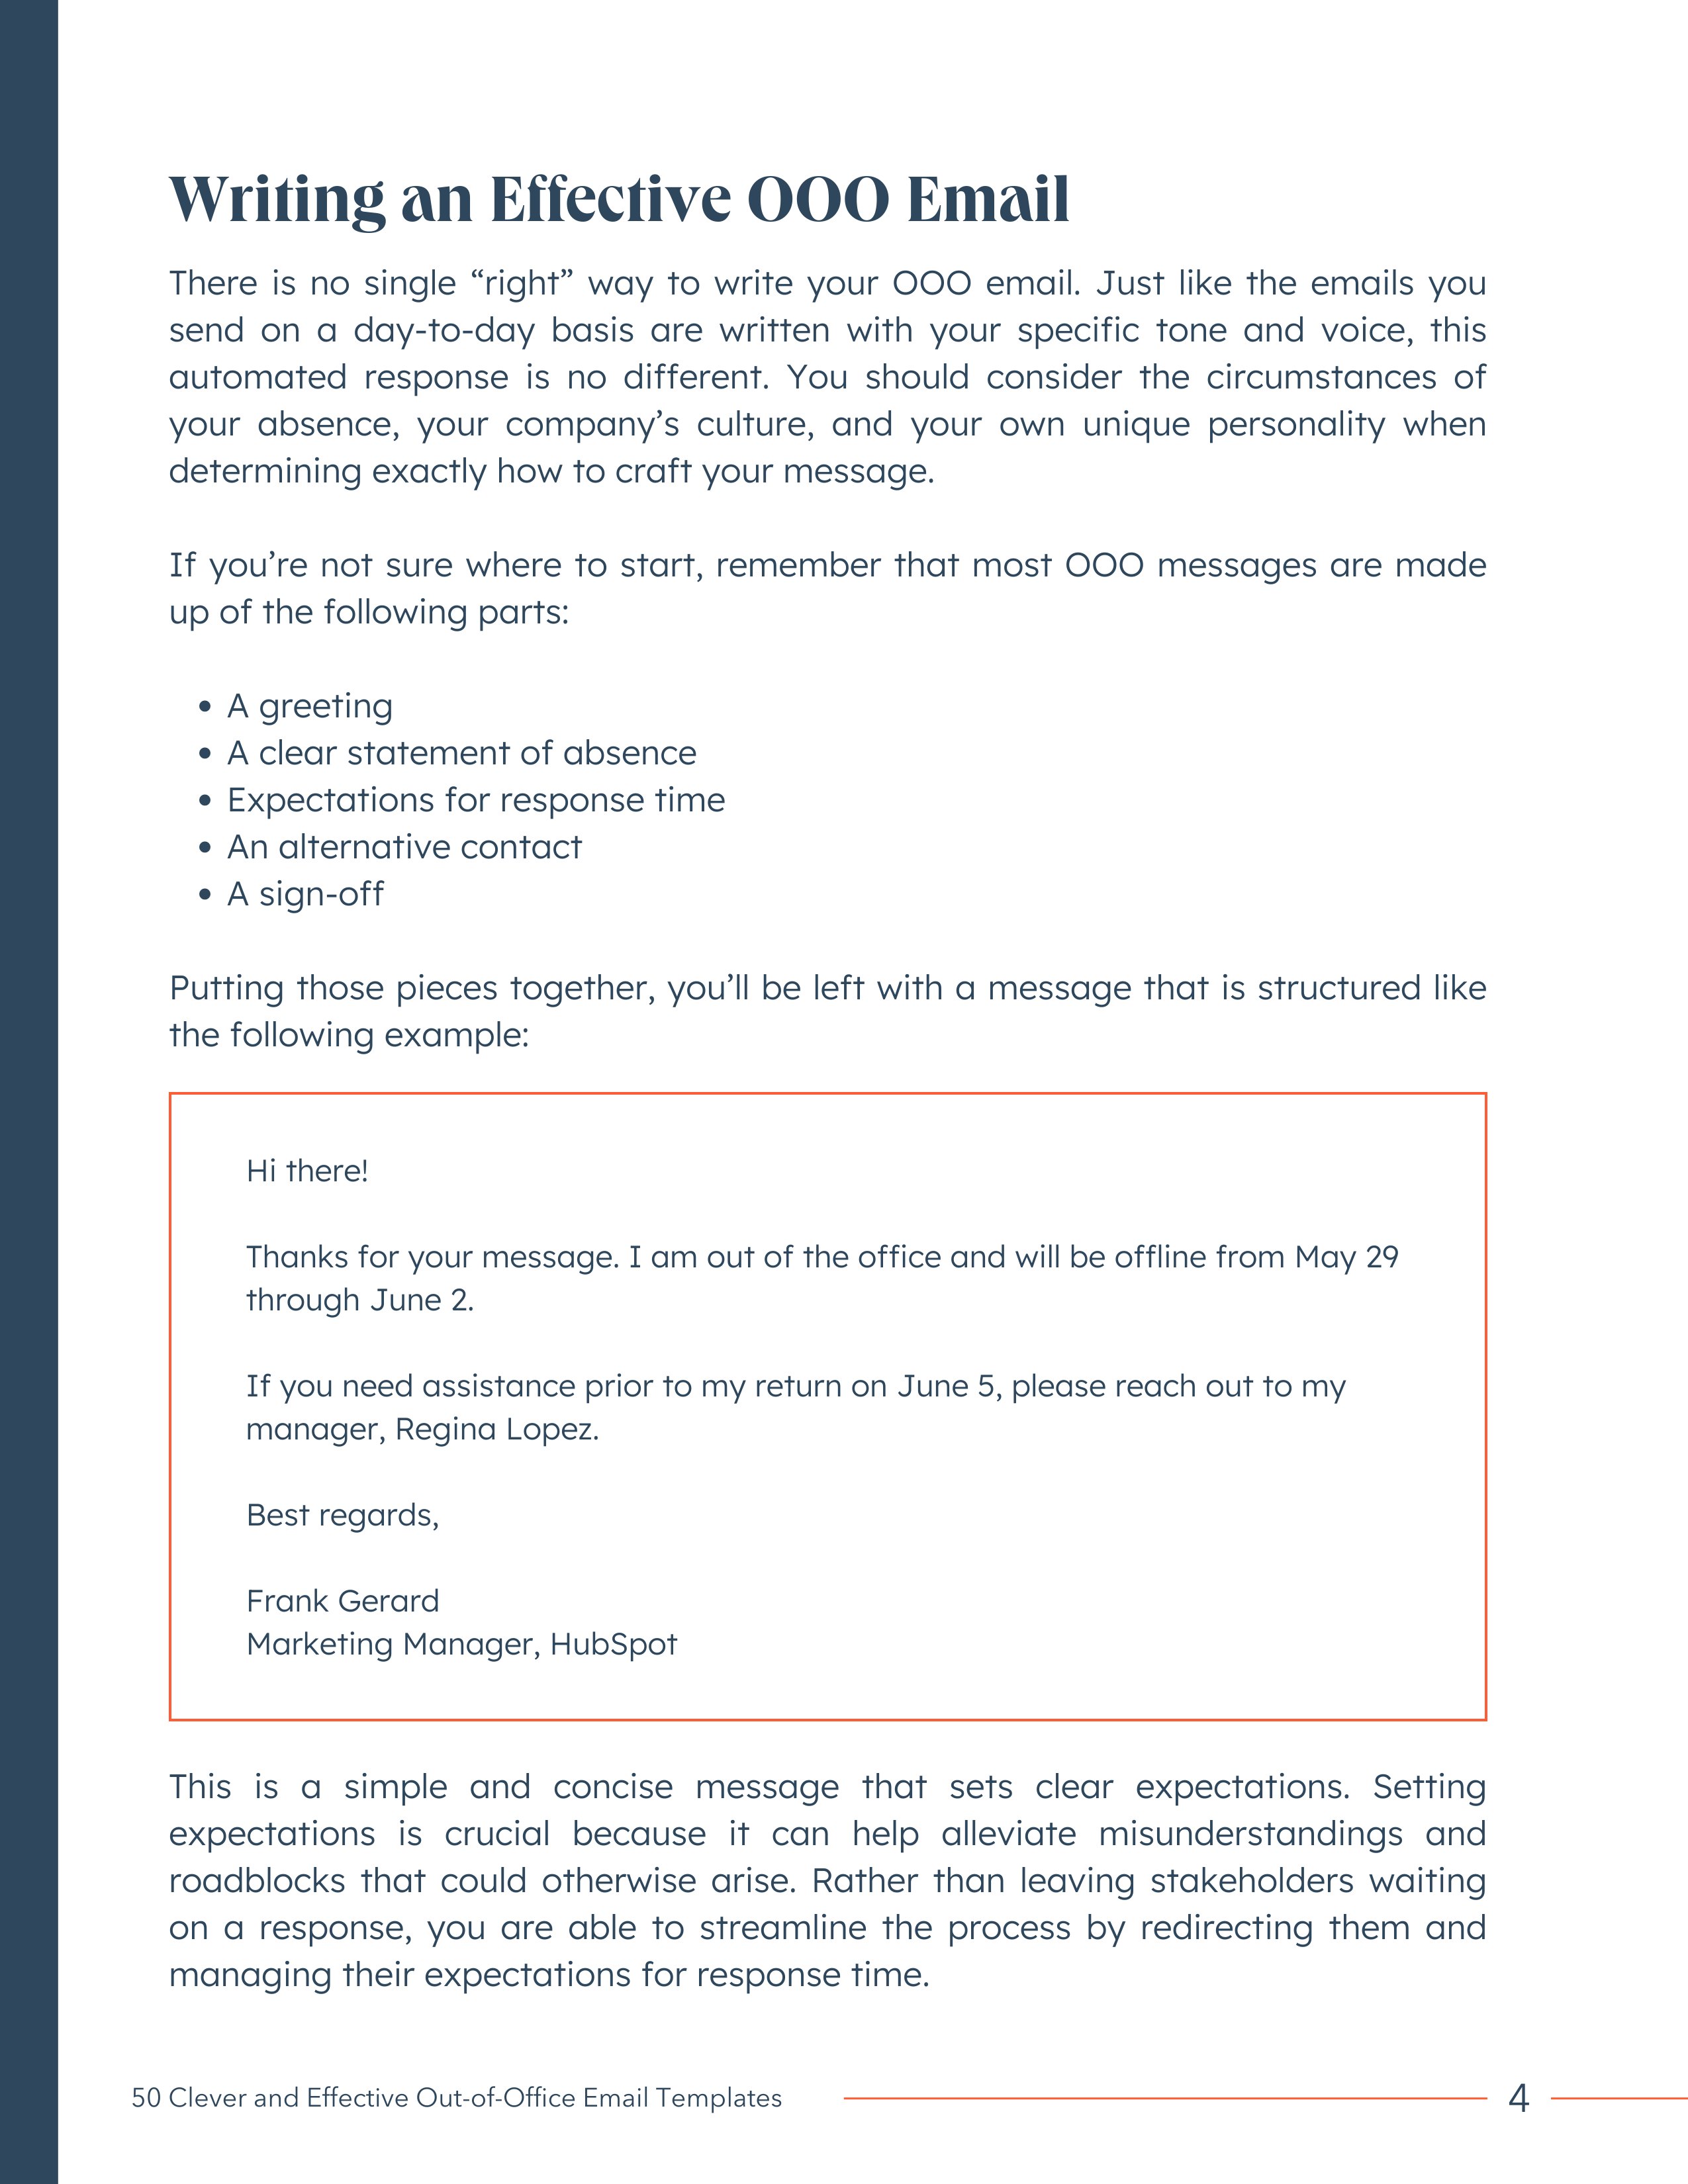 ebook - OOO Email Templates